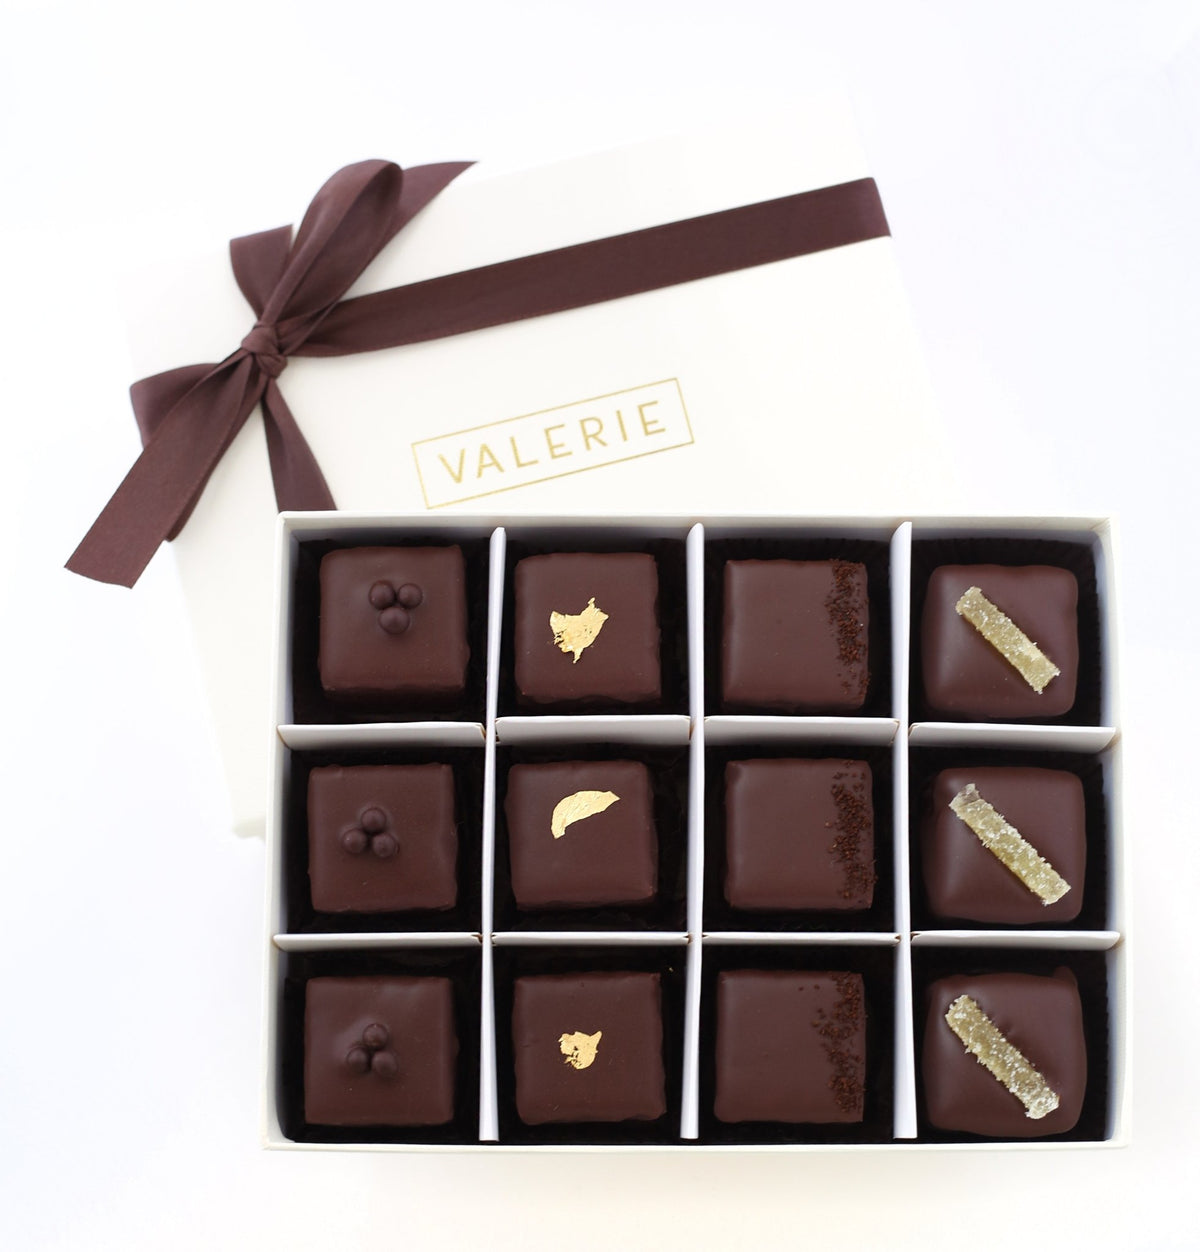 A box containing twelve chocolate-covered petits fours, some garnished with gold leaf, chocolate balls, espresso grounds, or candied ginger, with &quot;VALERIE&quot; branding on the lid.